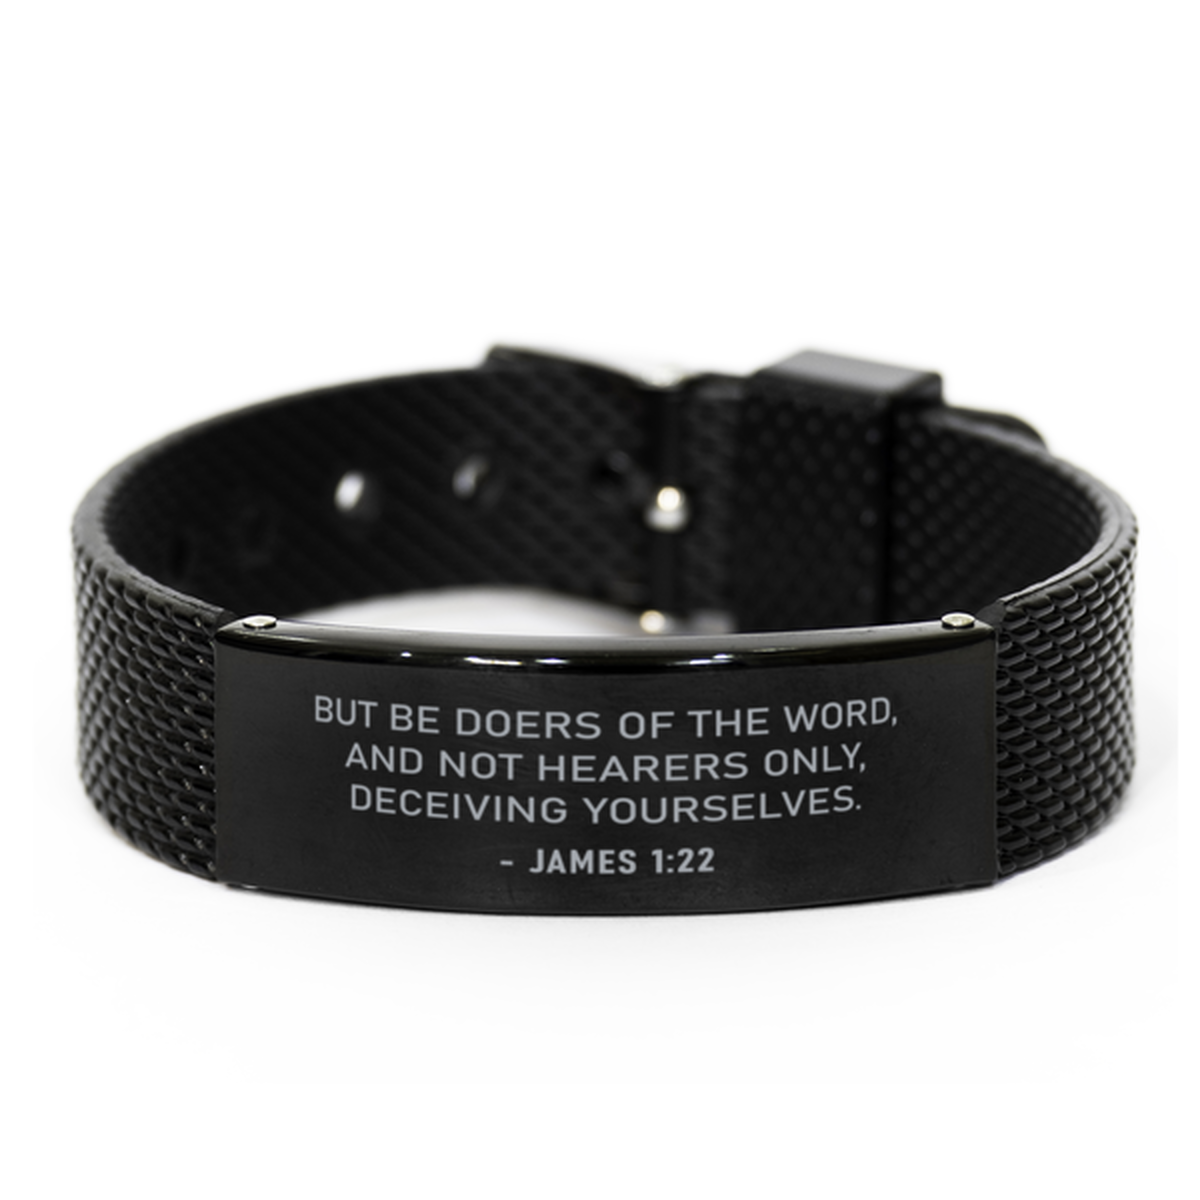 Christian Black Bracelet,, James 1:22 But Be Doers Of The Word, And Not Hearers Only,, Motivational Bible Verse Gifts For Men Women